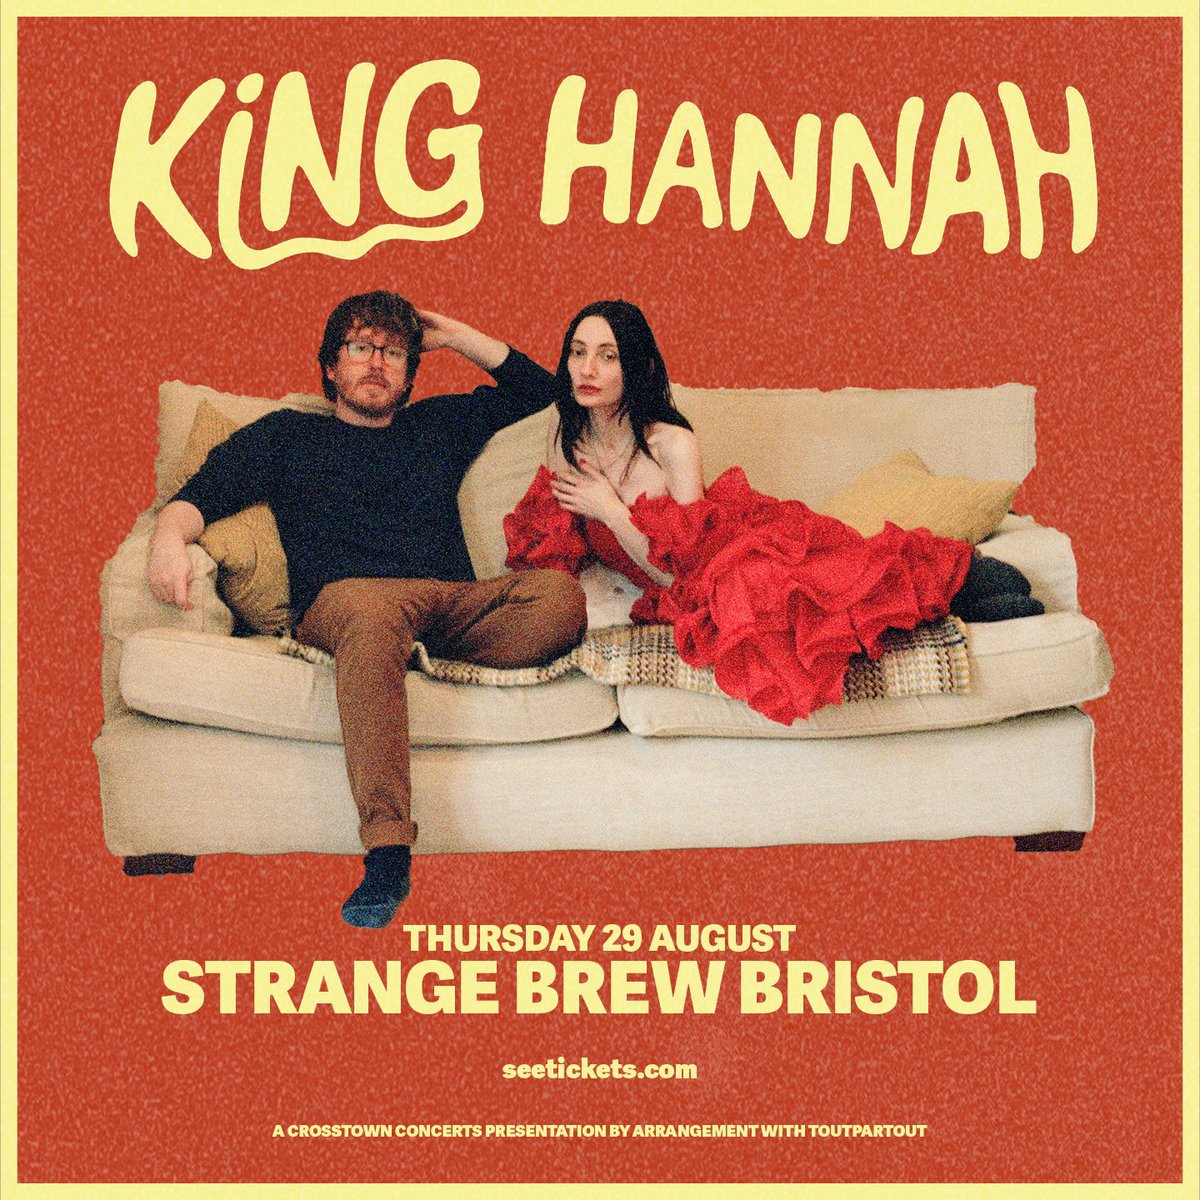 .@kinghannahmusic play @strangebrewbriz on Thursday 29th August. Tickets on sale Friday 19th at 10am: crosstownconcerts.seetickets.com/event/king-han…